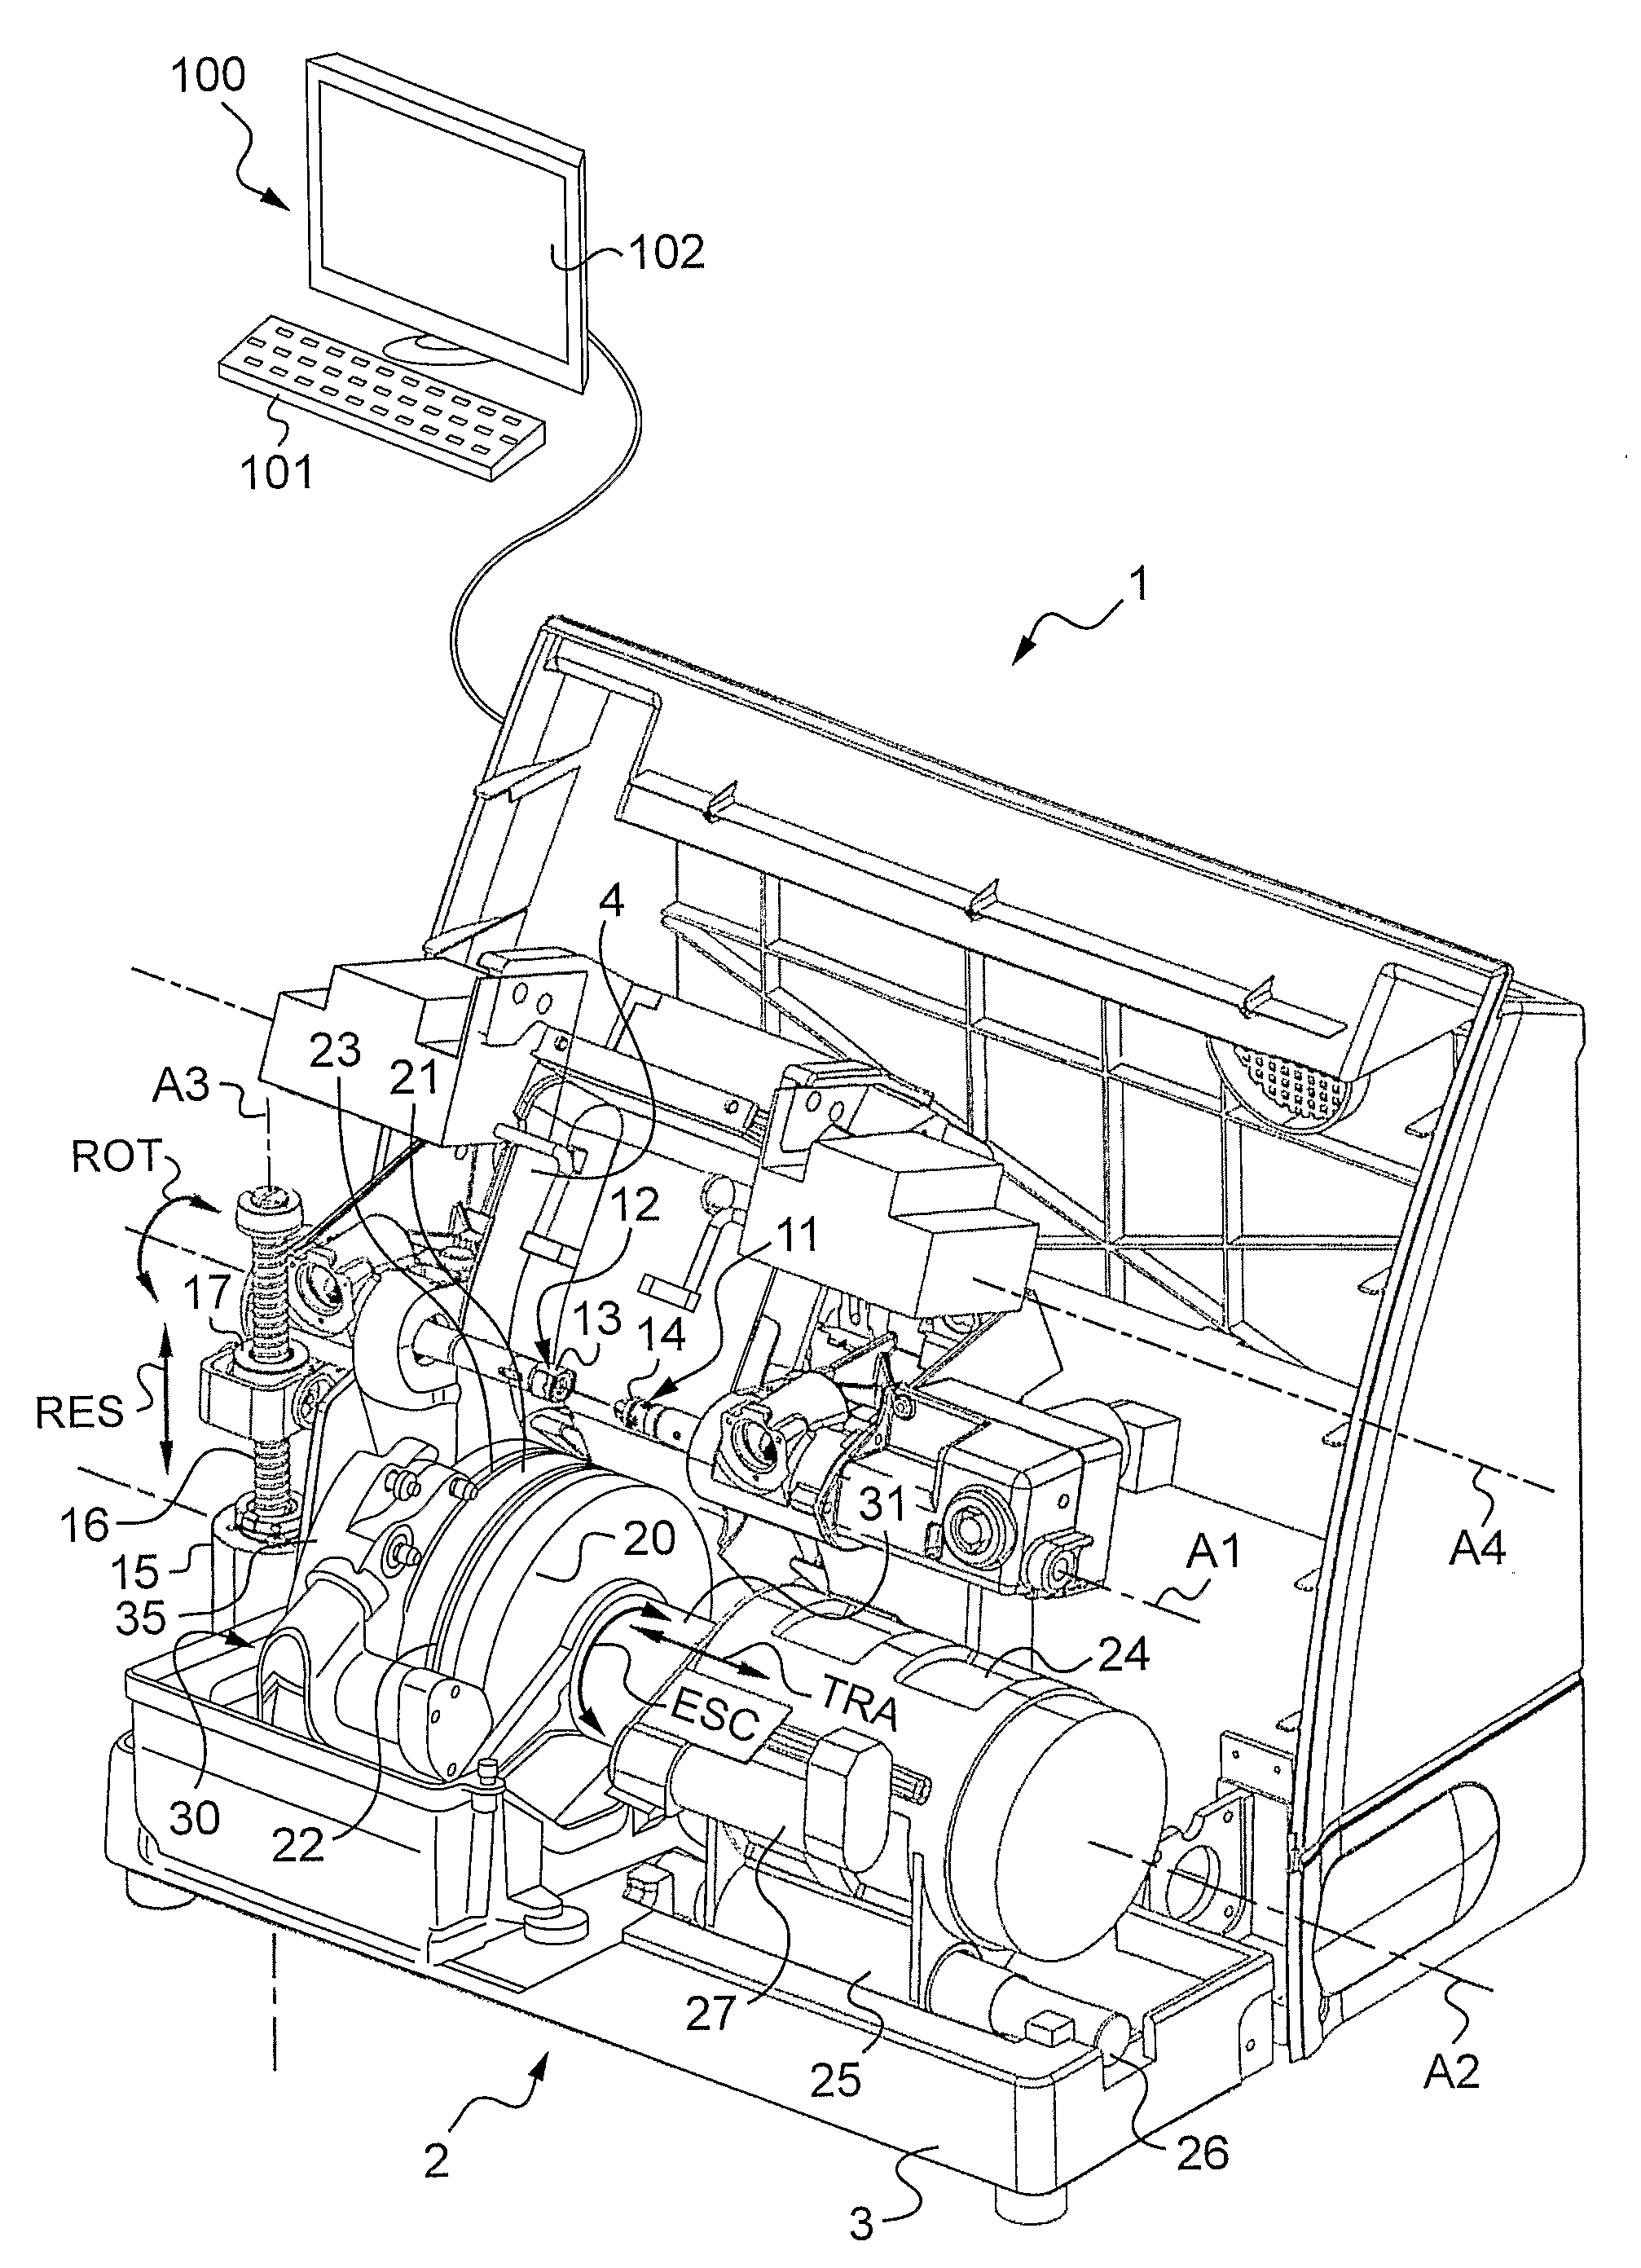 Device for machining ophthalmic lenses, the device having a plurality of machining tools placed on a swivel module